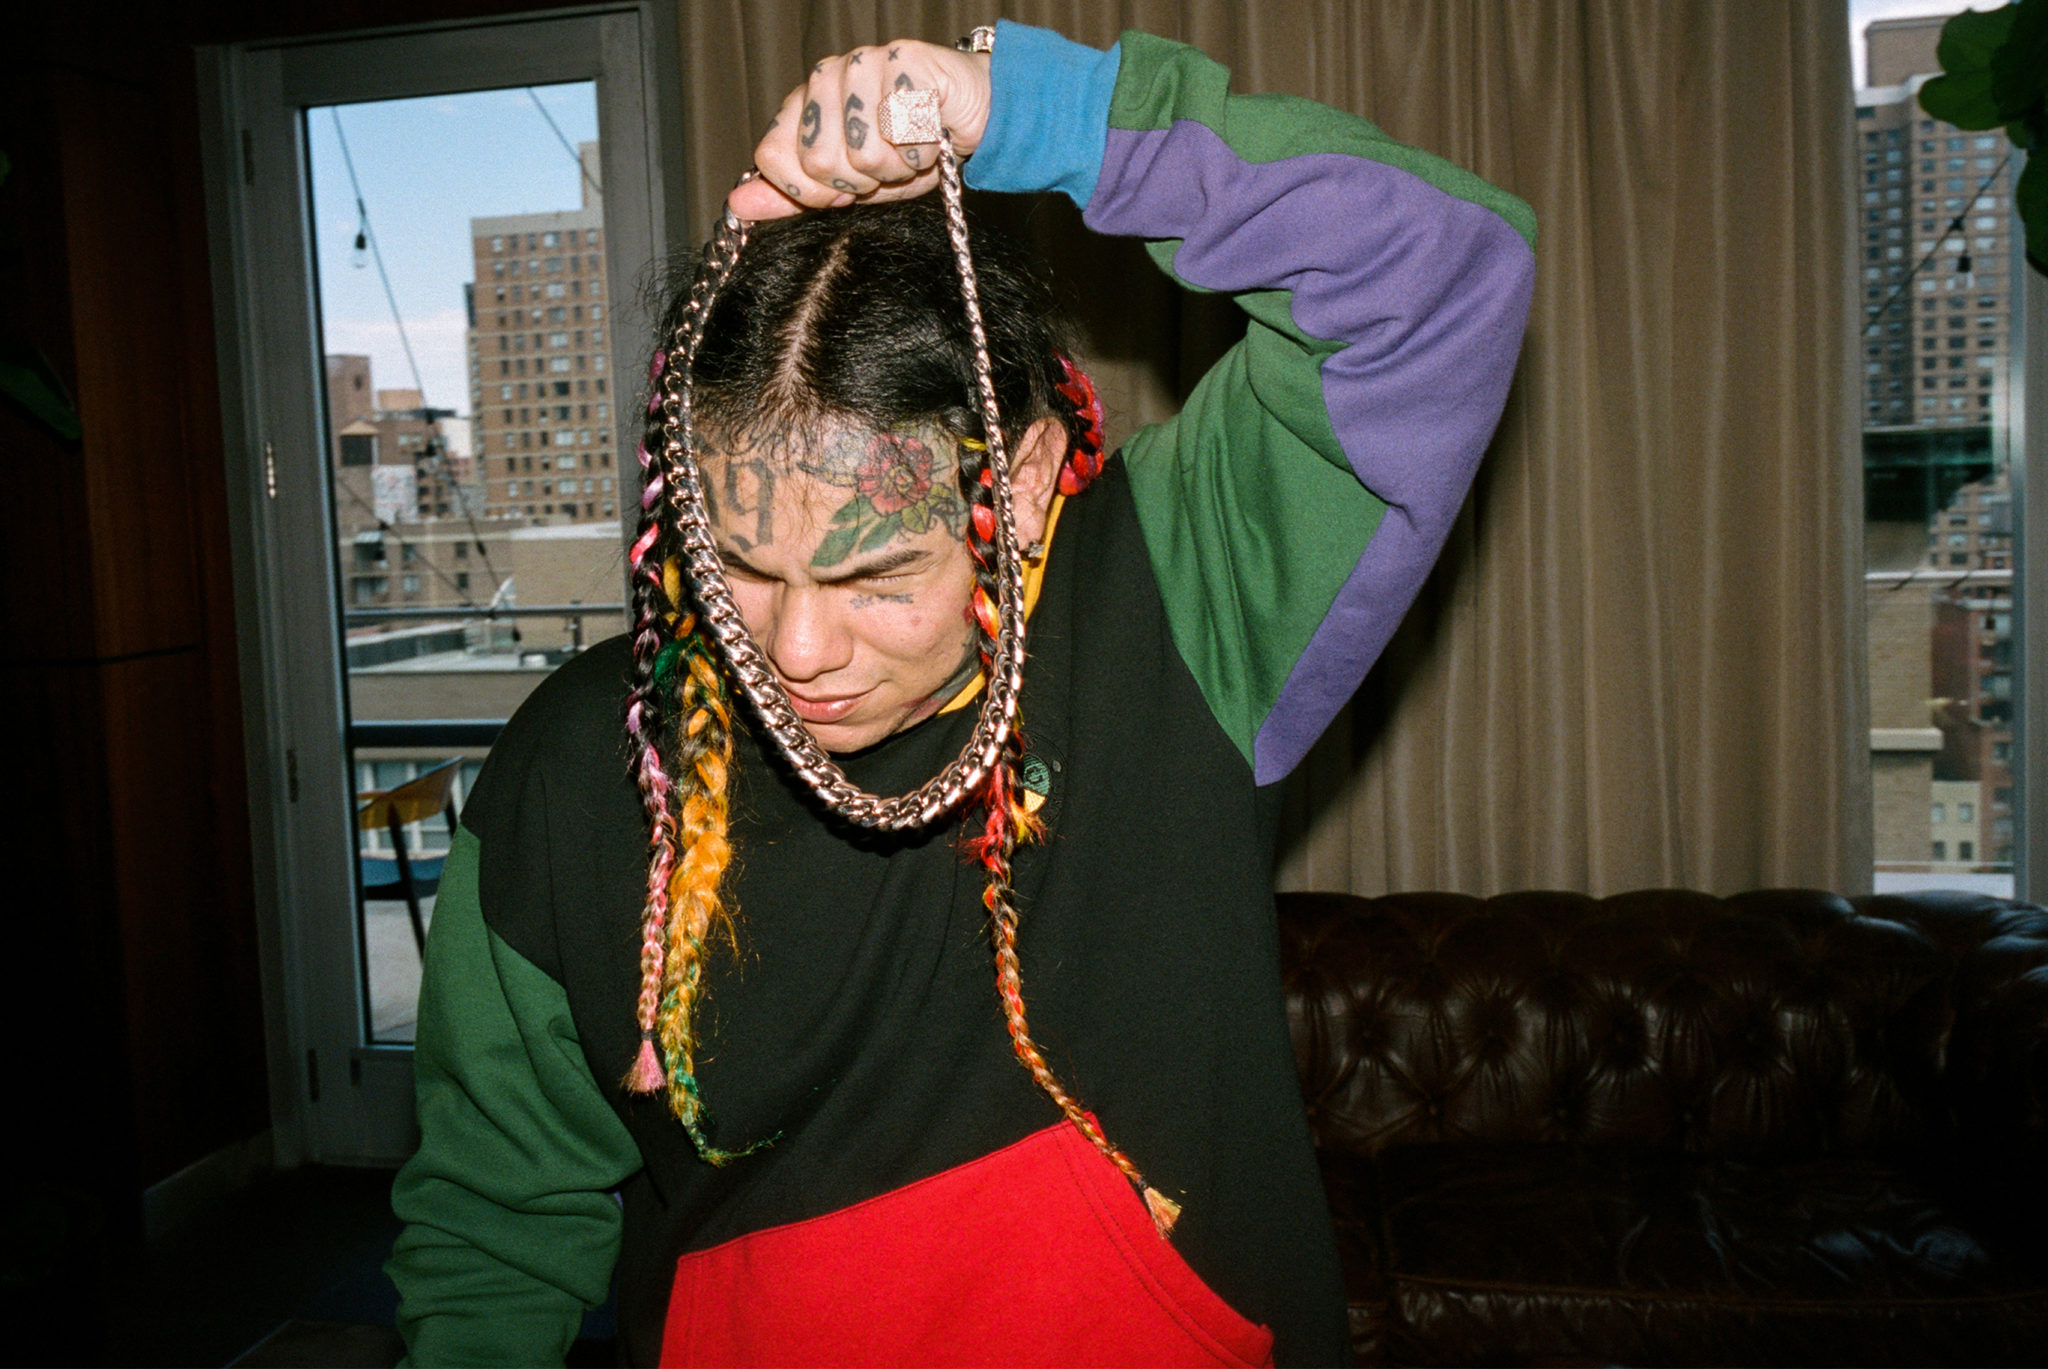 The Rapper 6ix9ine Born Daniel Hernandez And Also Known As Tekashi69 In New York Aug 23